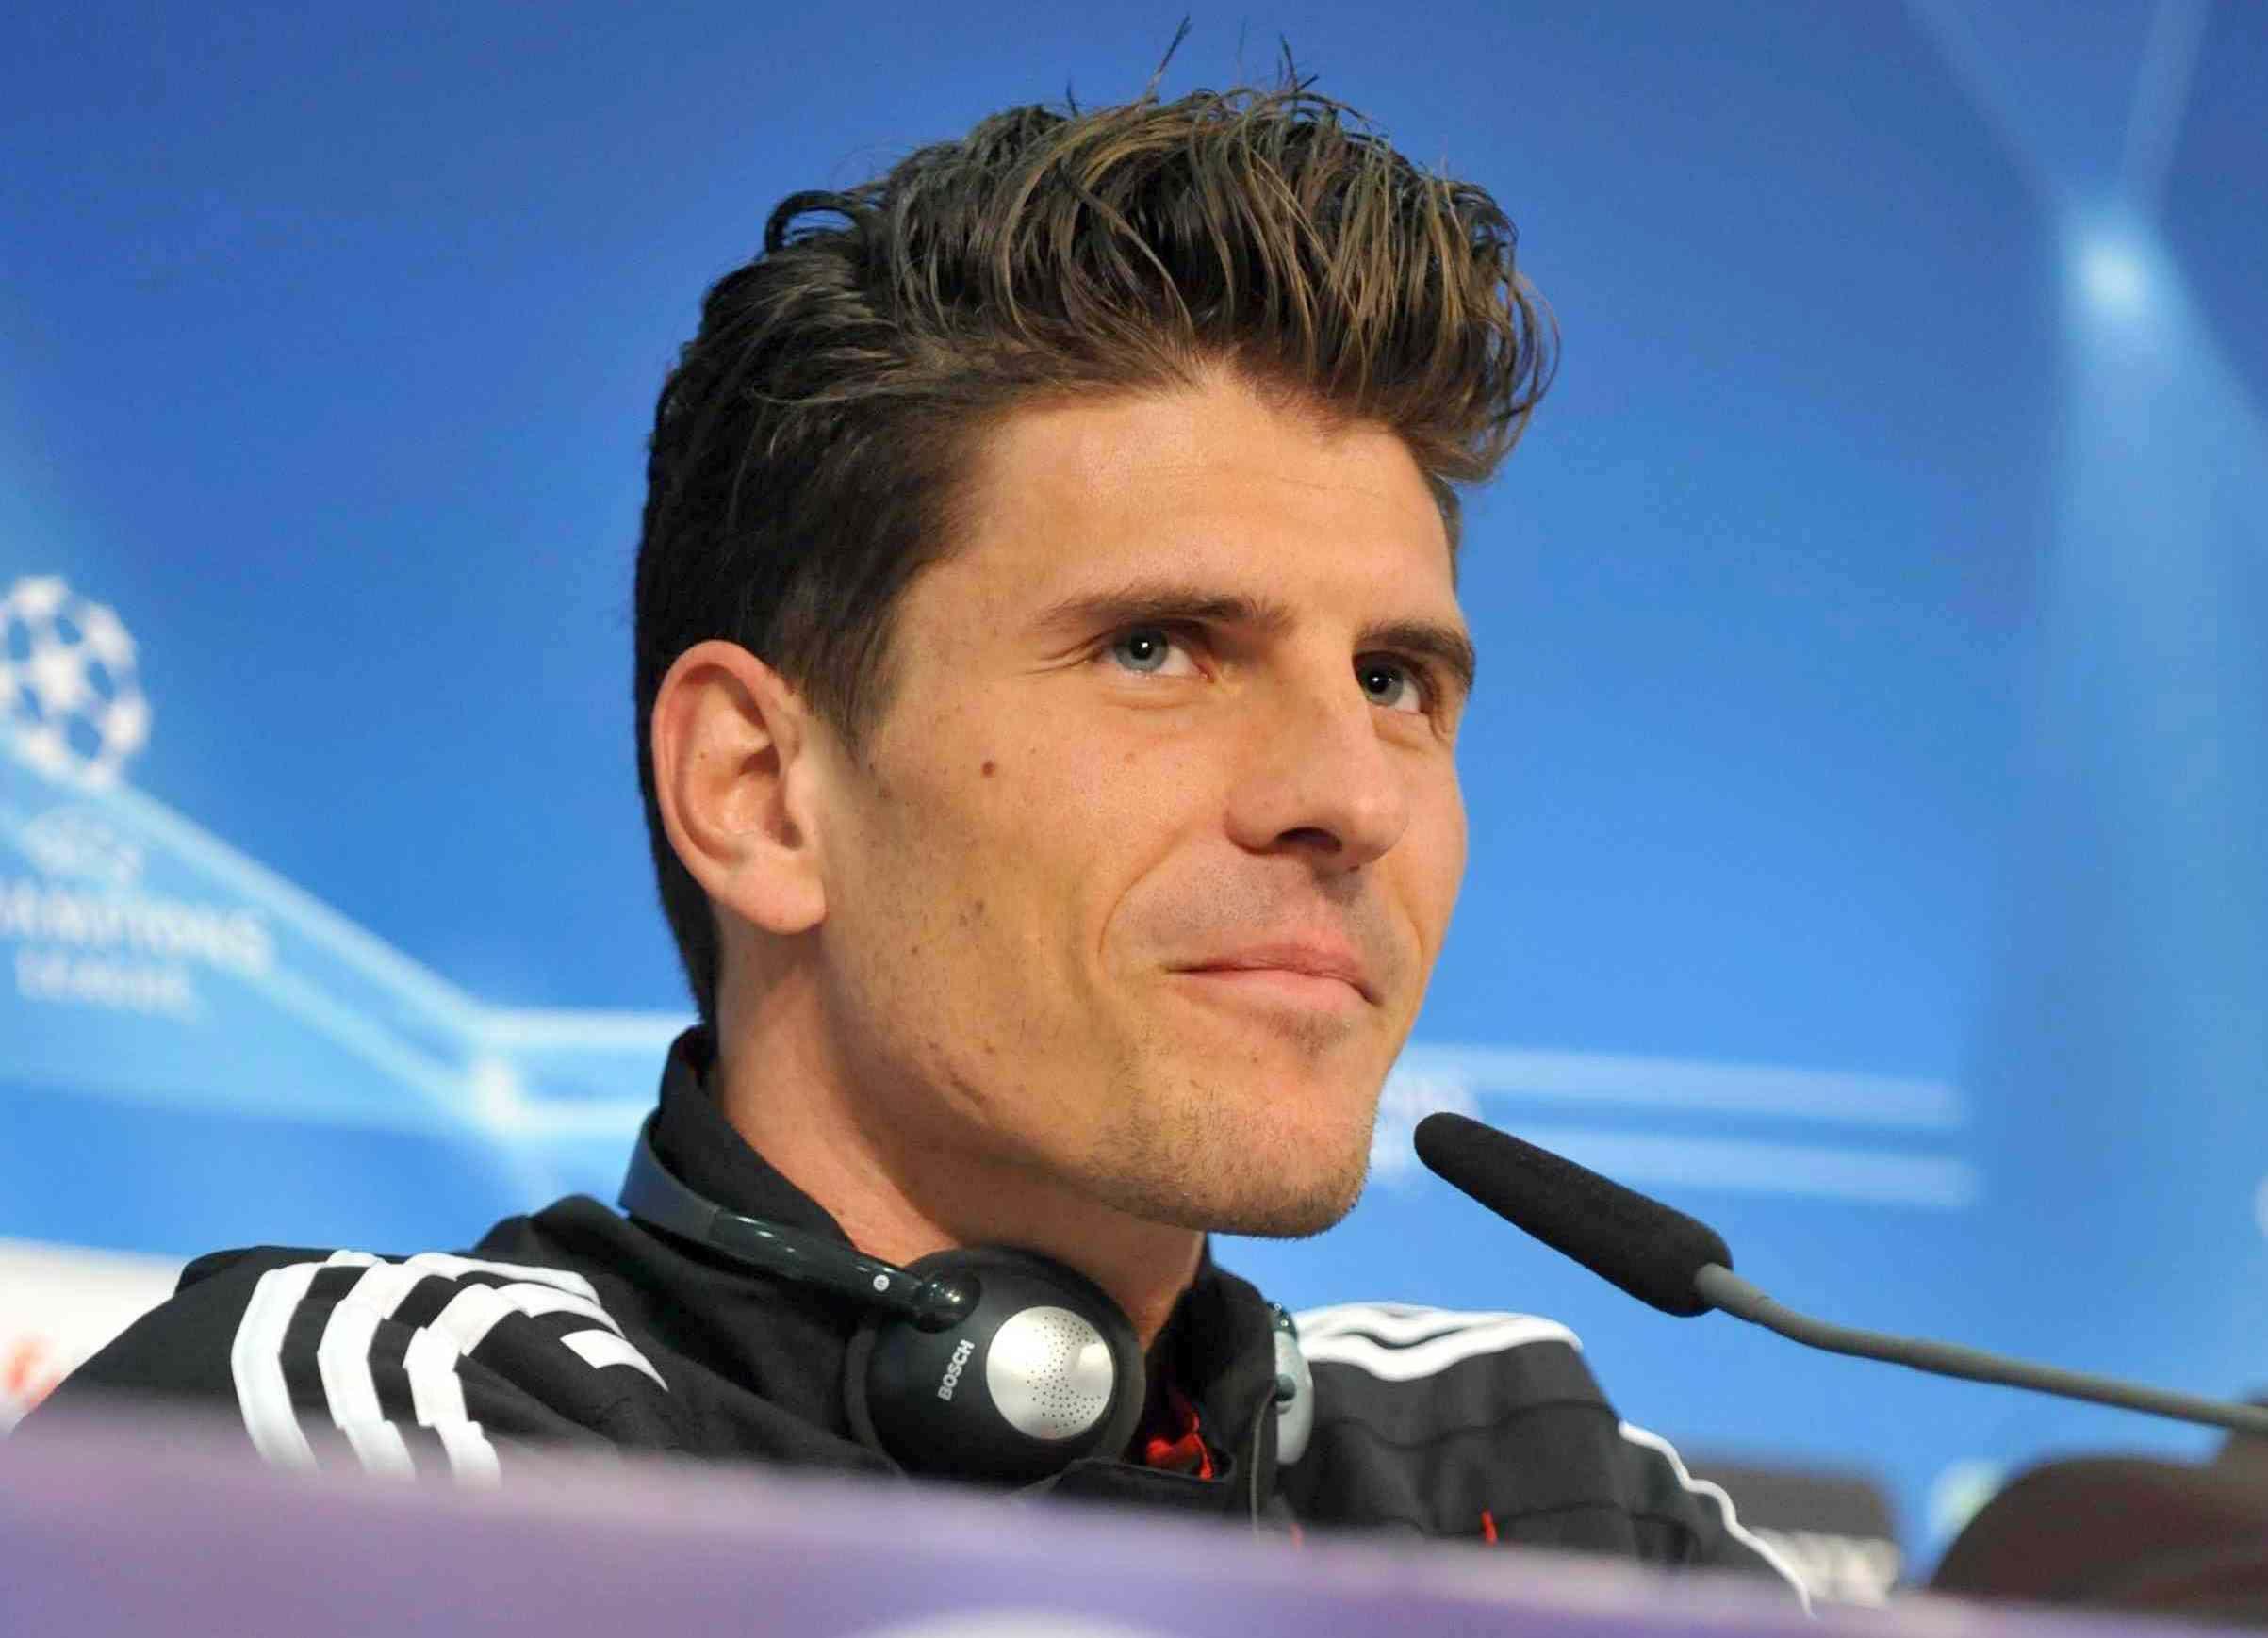 The best football player of Fiorentina Mario Gomez on the interviu